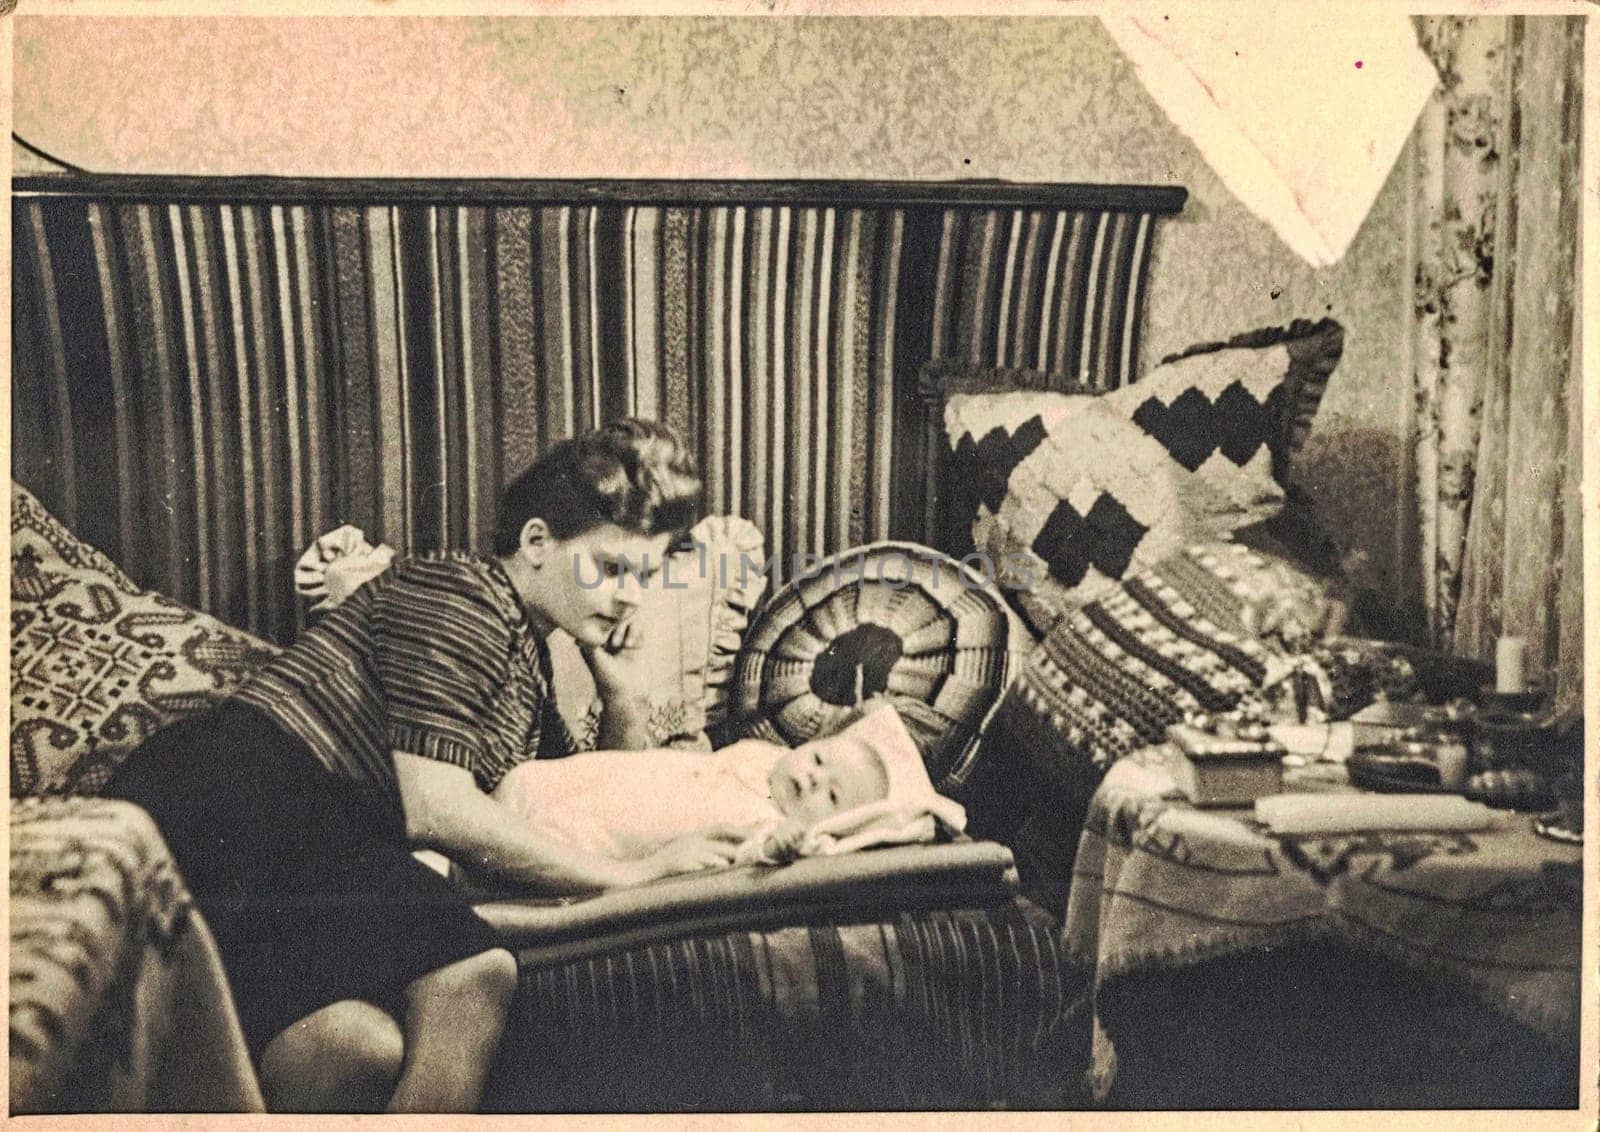 NEURUPPIN, EASTERN GERMANY - CIRCA 1960s: Retro photo shows happy mum with baby child. The sixties and knitted pillow in Socialist bloc.